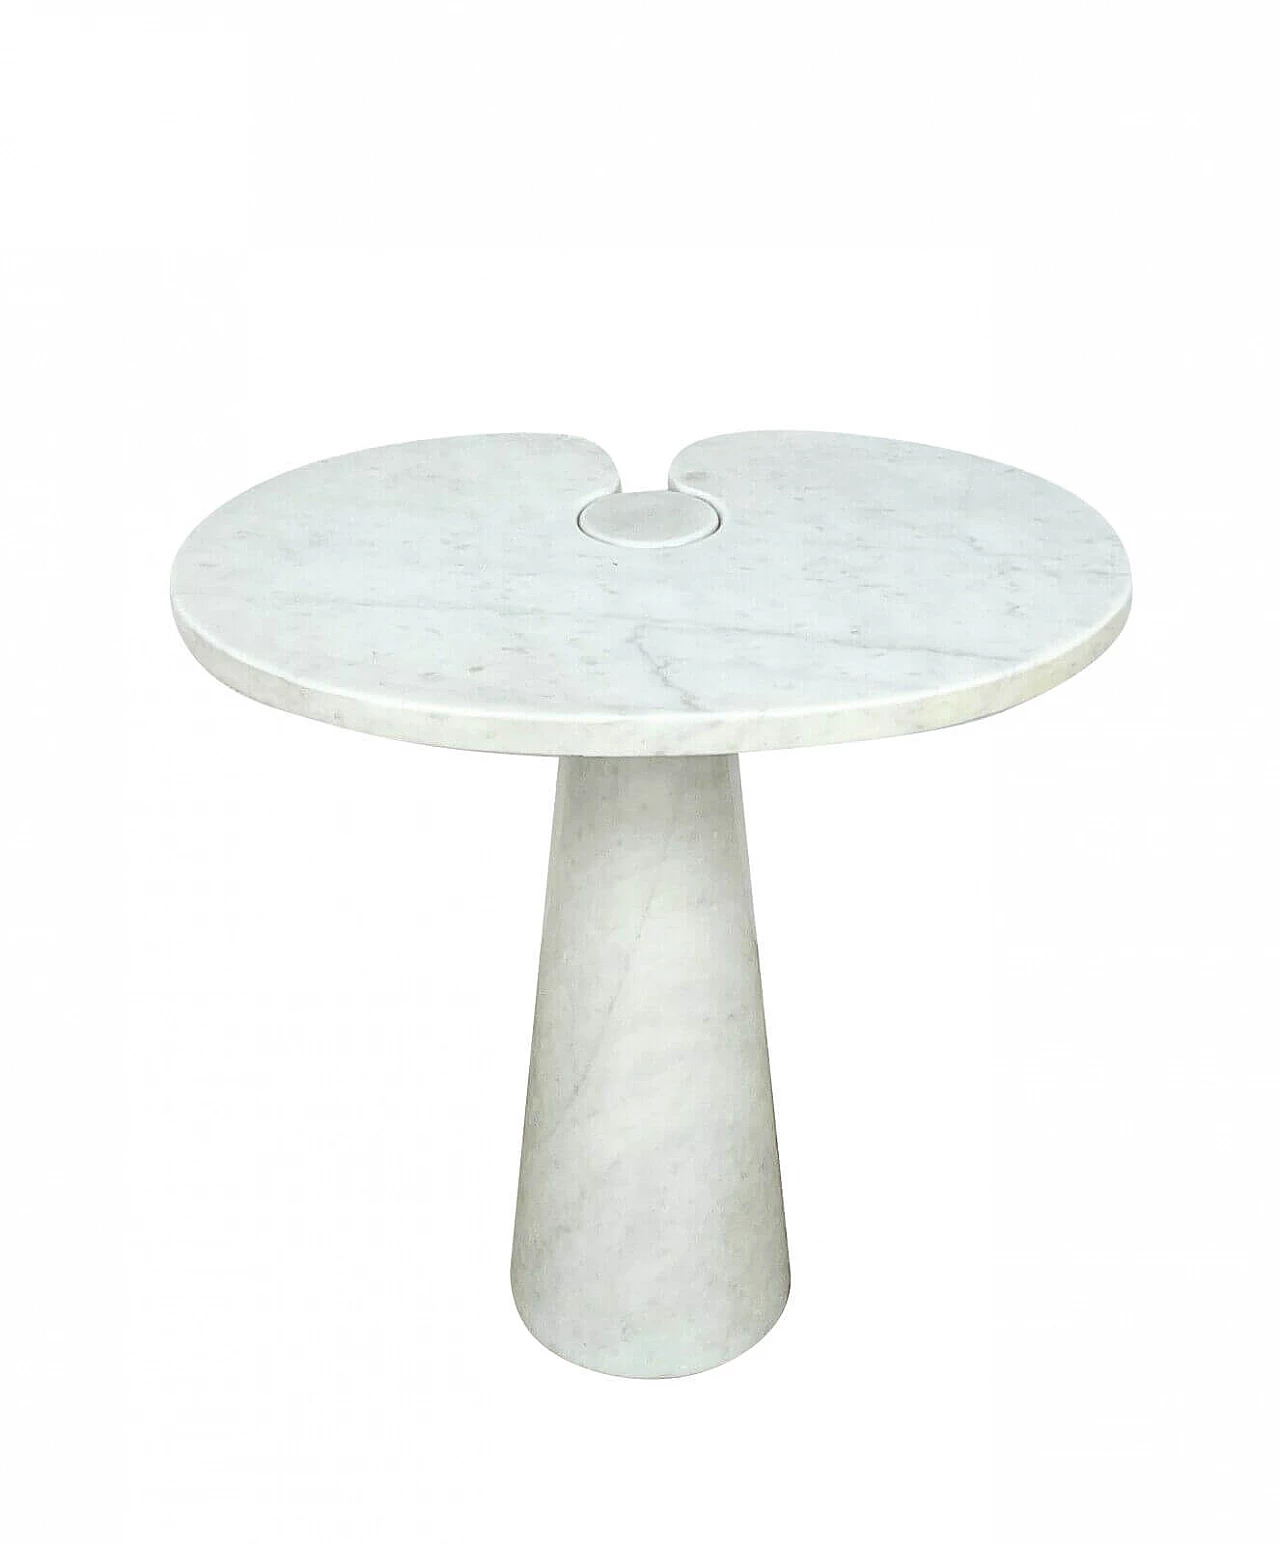 Eros side table in Carrara marble by Angelo Mangiarotti for Skipper, 70s 1312406